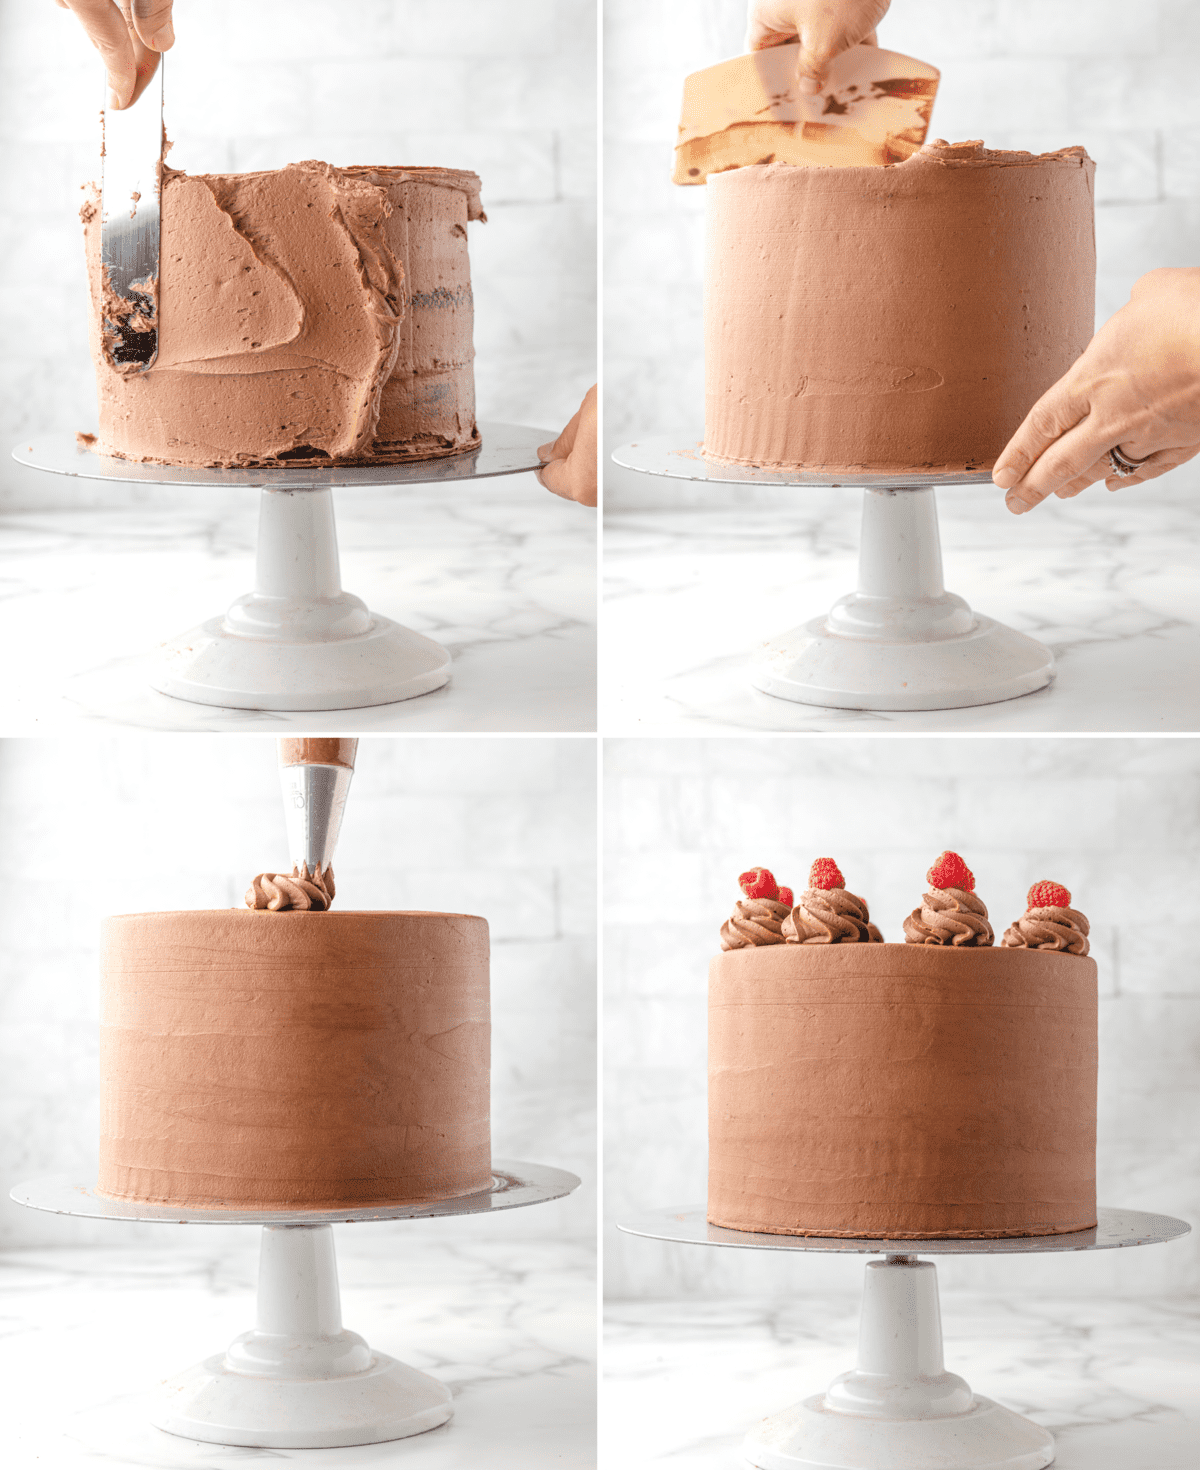 4 photos showing process of decorating chocolate raspberry cake